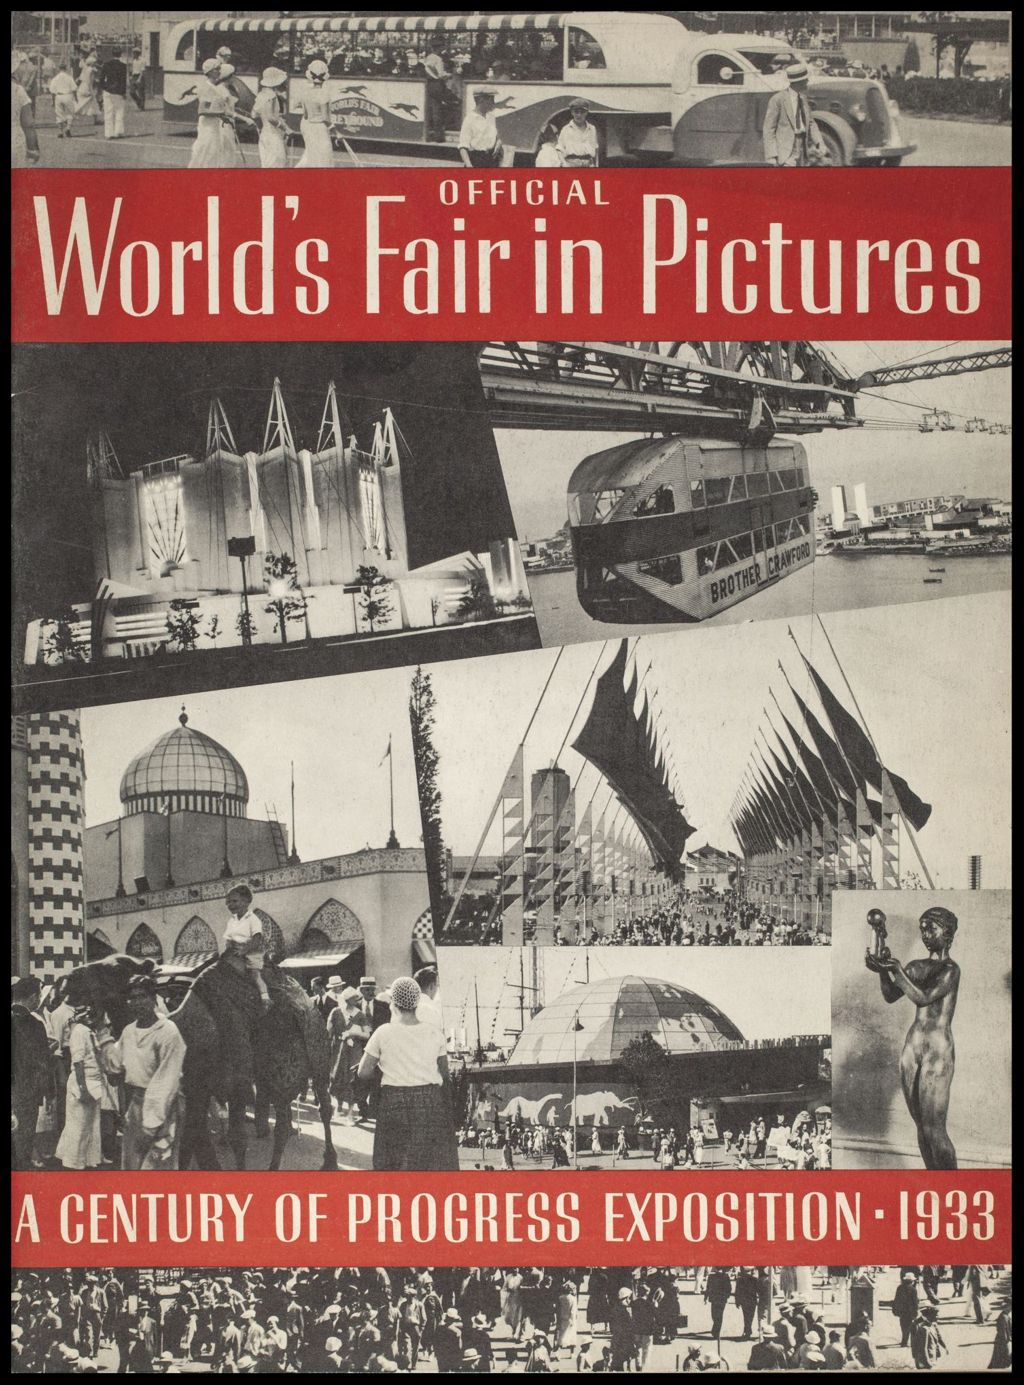 Official world's fair in pictures: A Century of Progress exposition (Folder 16-178)